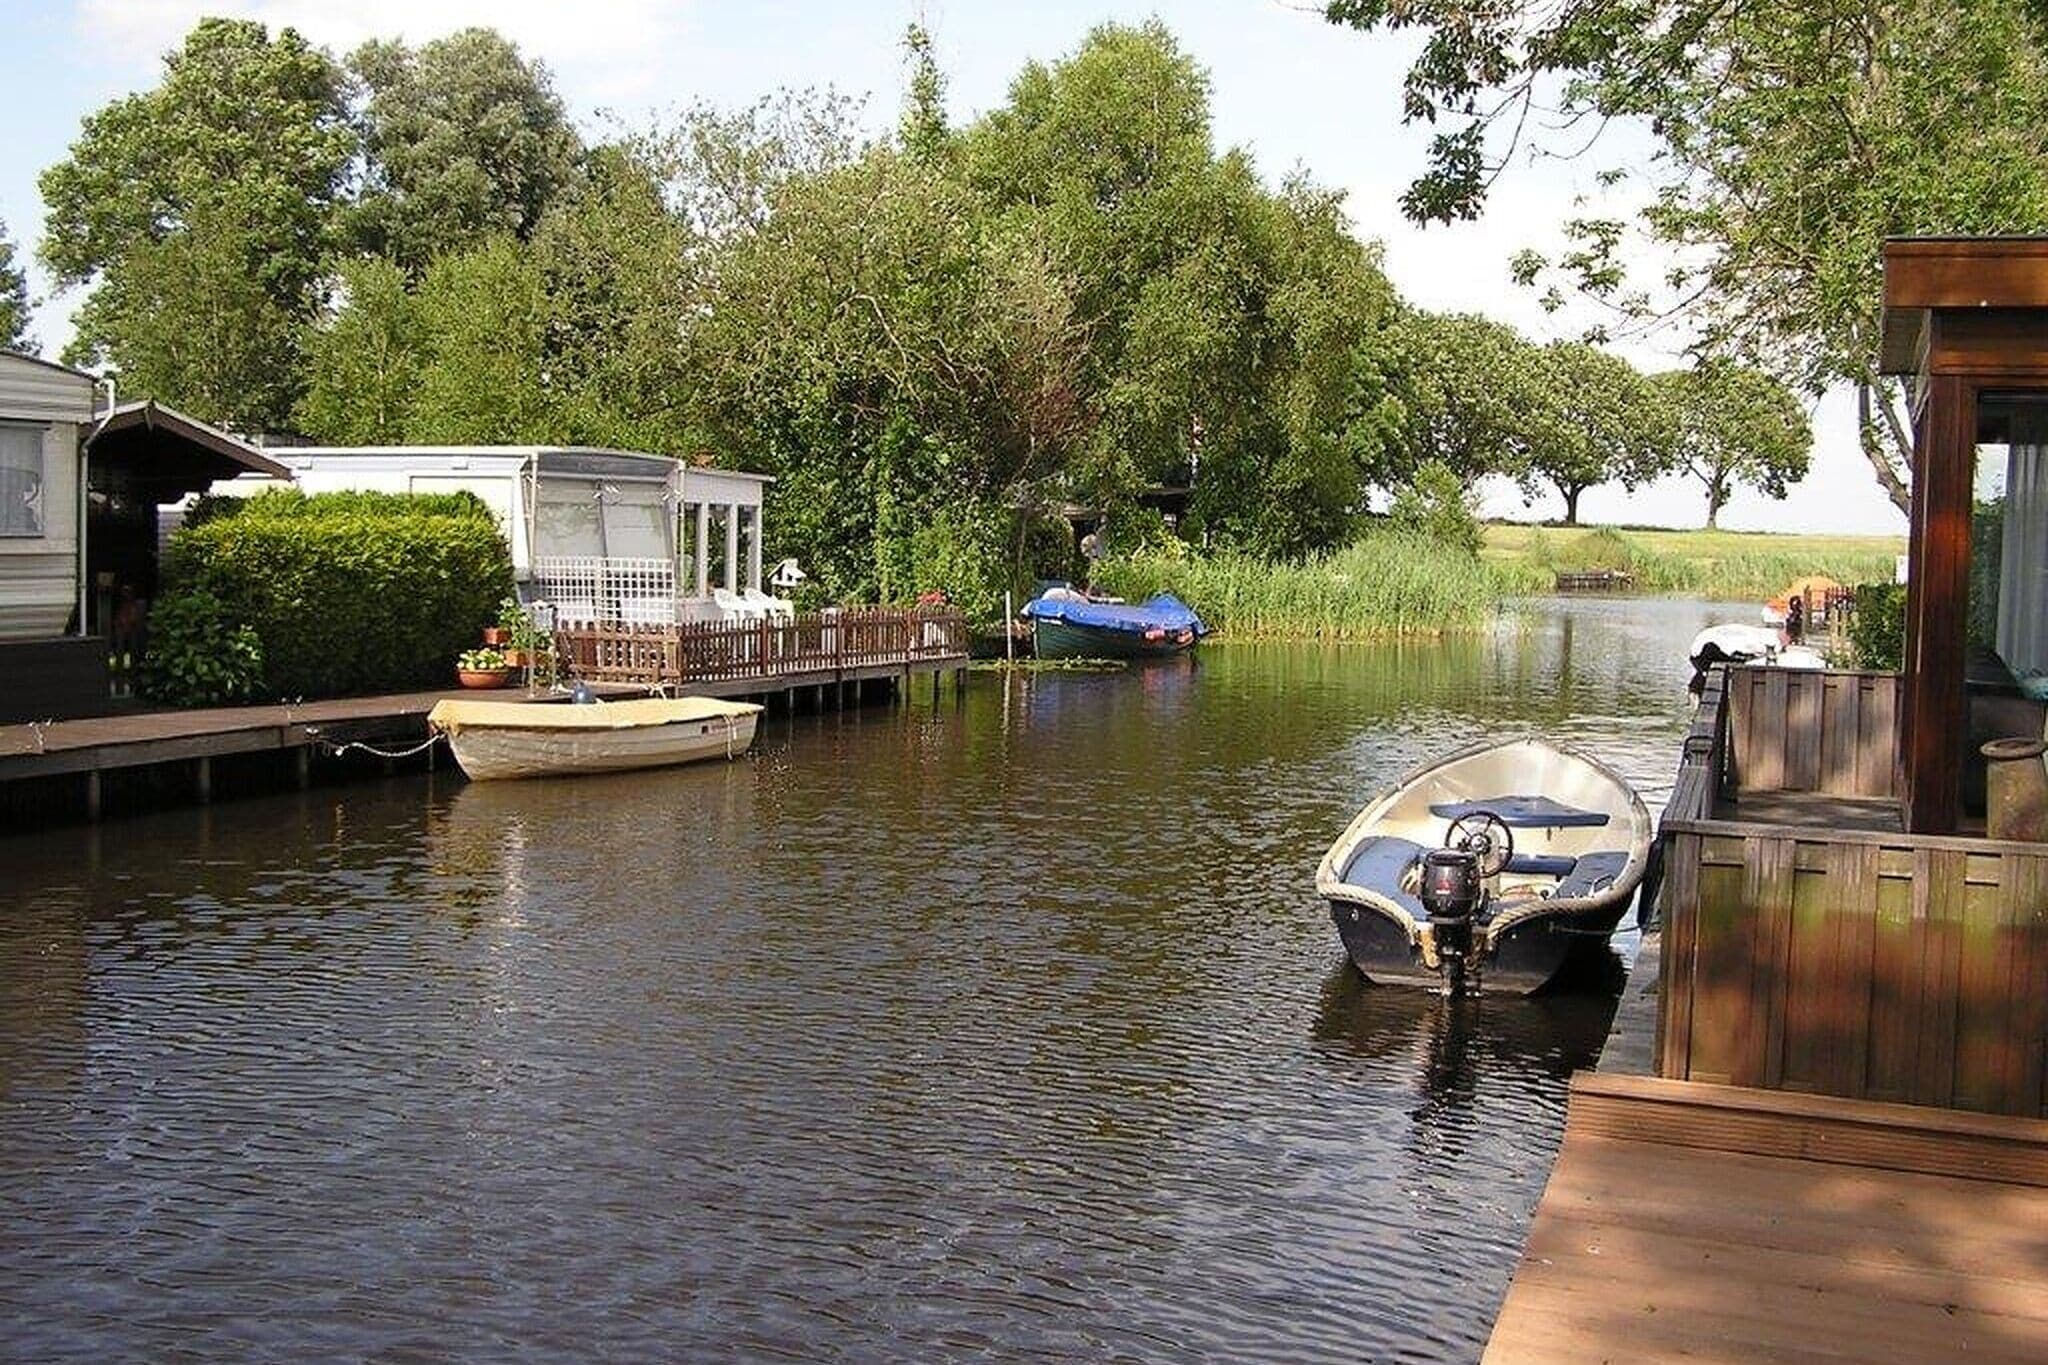 Nice holiday home with boat and jetty